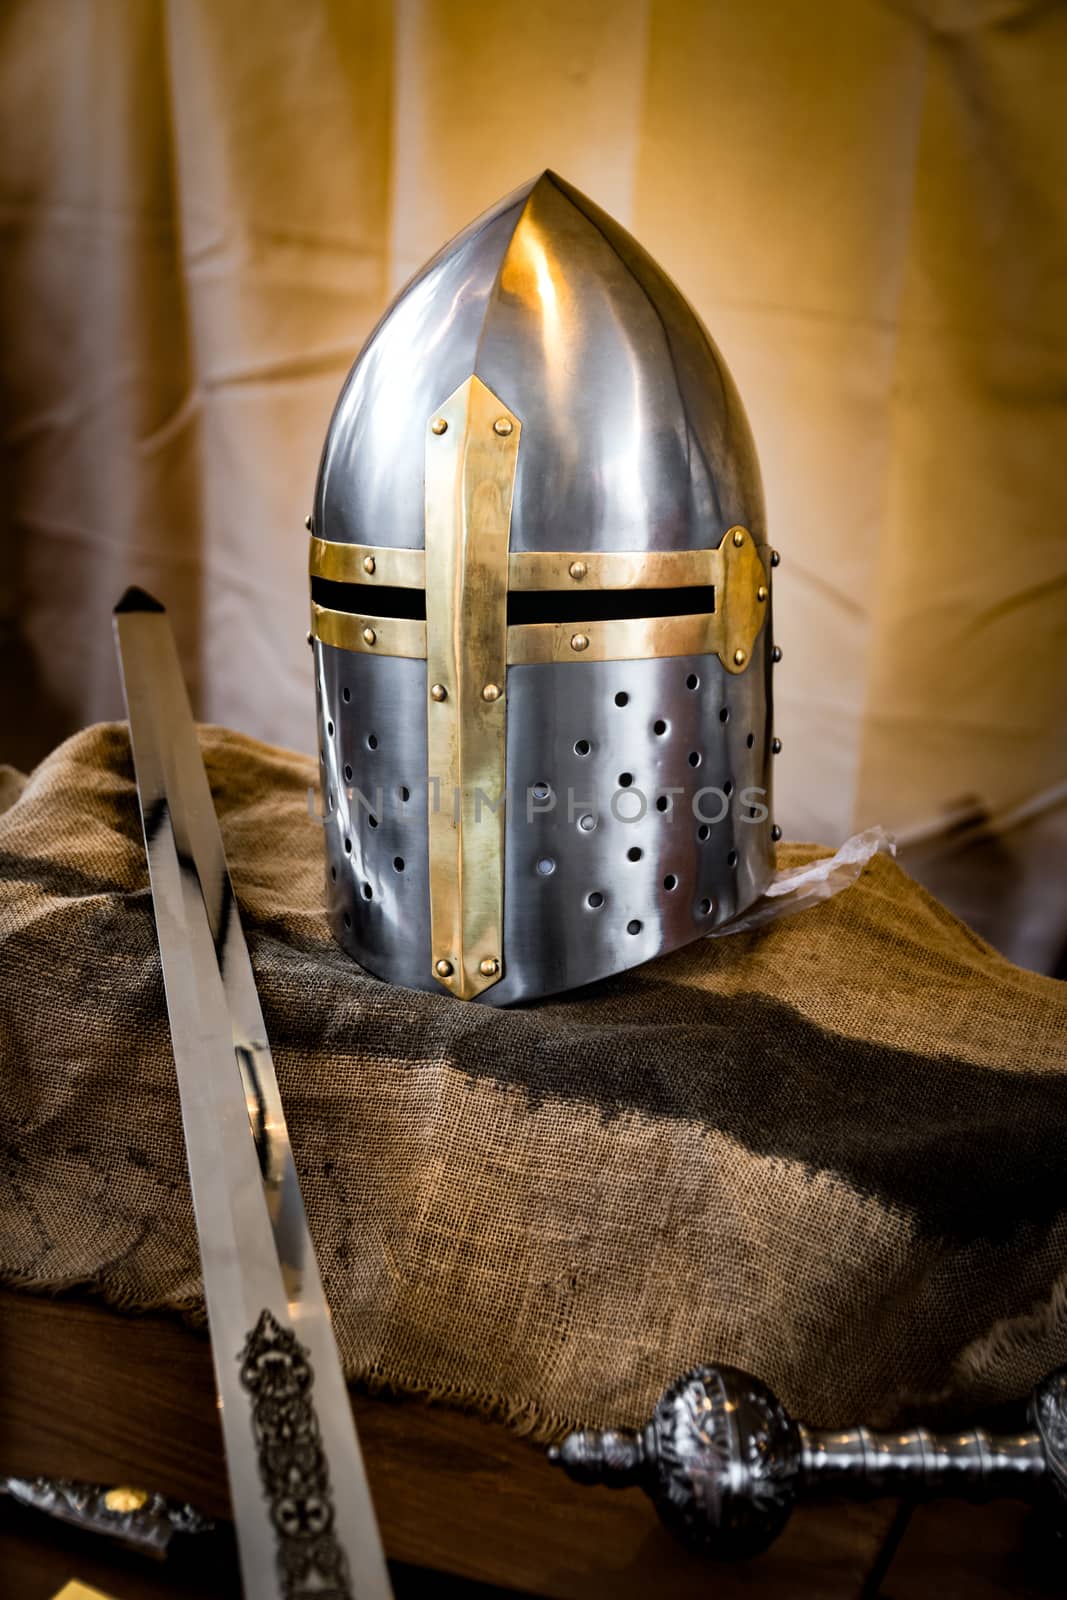 Helmet of a crusader armor . by Isaac74